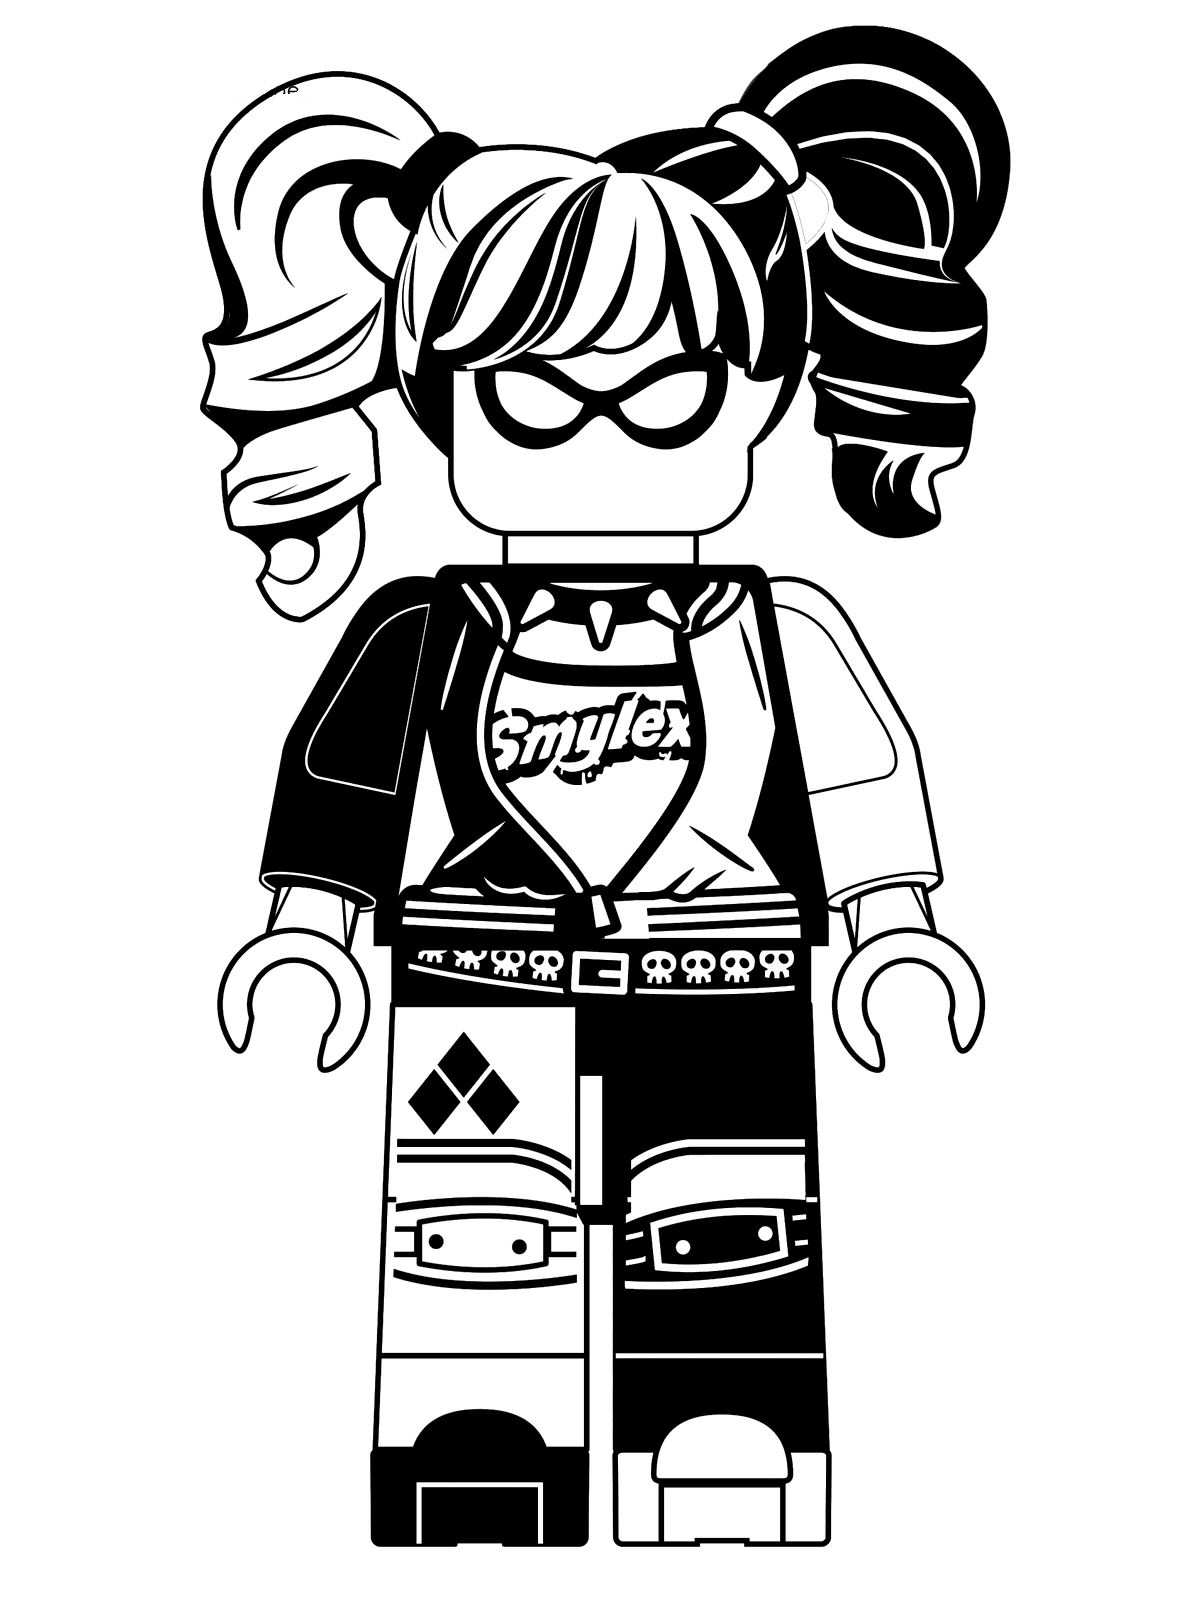 Lego Batman   coloring pages to print and coloring - Drawing 6